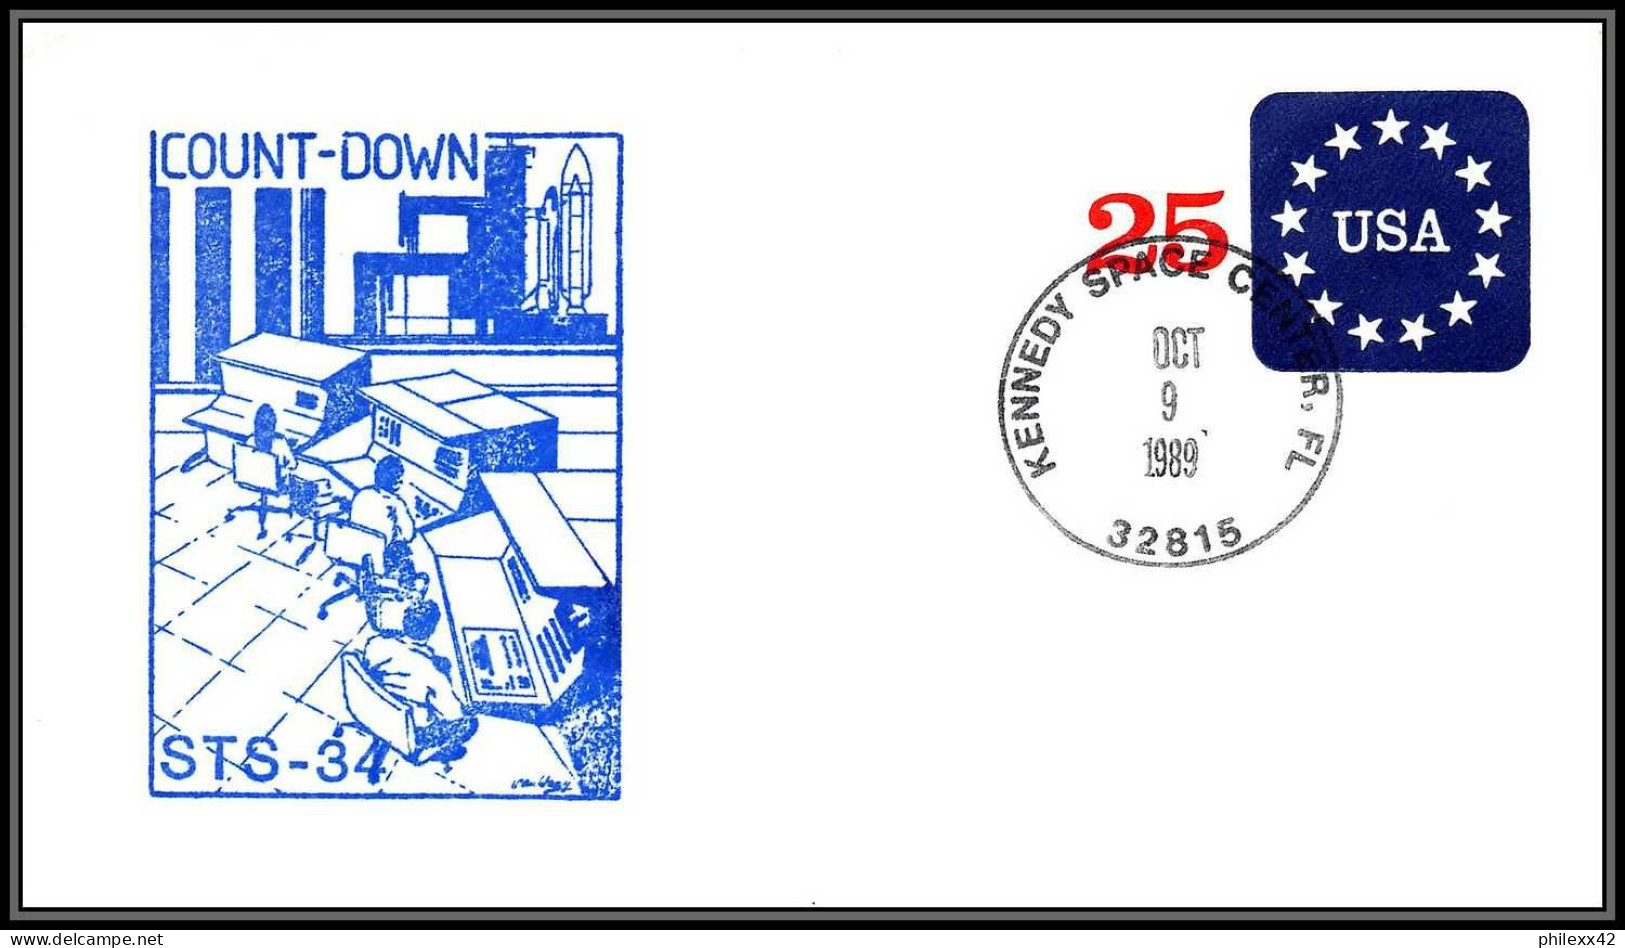 1814 Espace (space) Entier Postal (Stamped Stationery) USA STS 34 Count Down Atlantis Navette Shuttle - 9/10/1989 - Stati Uniti